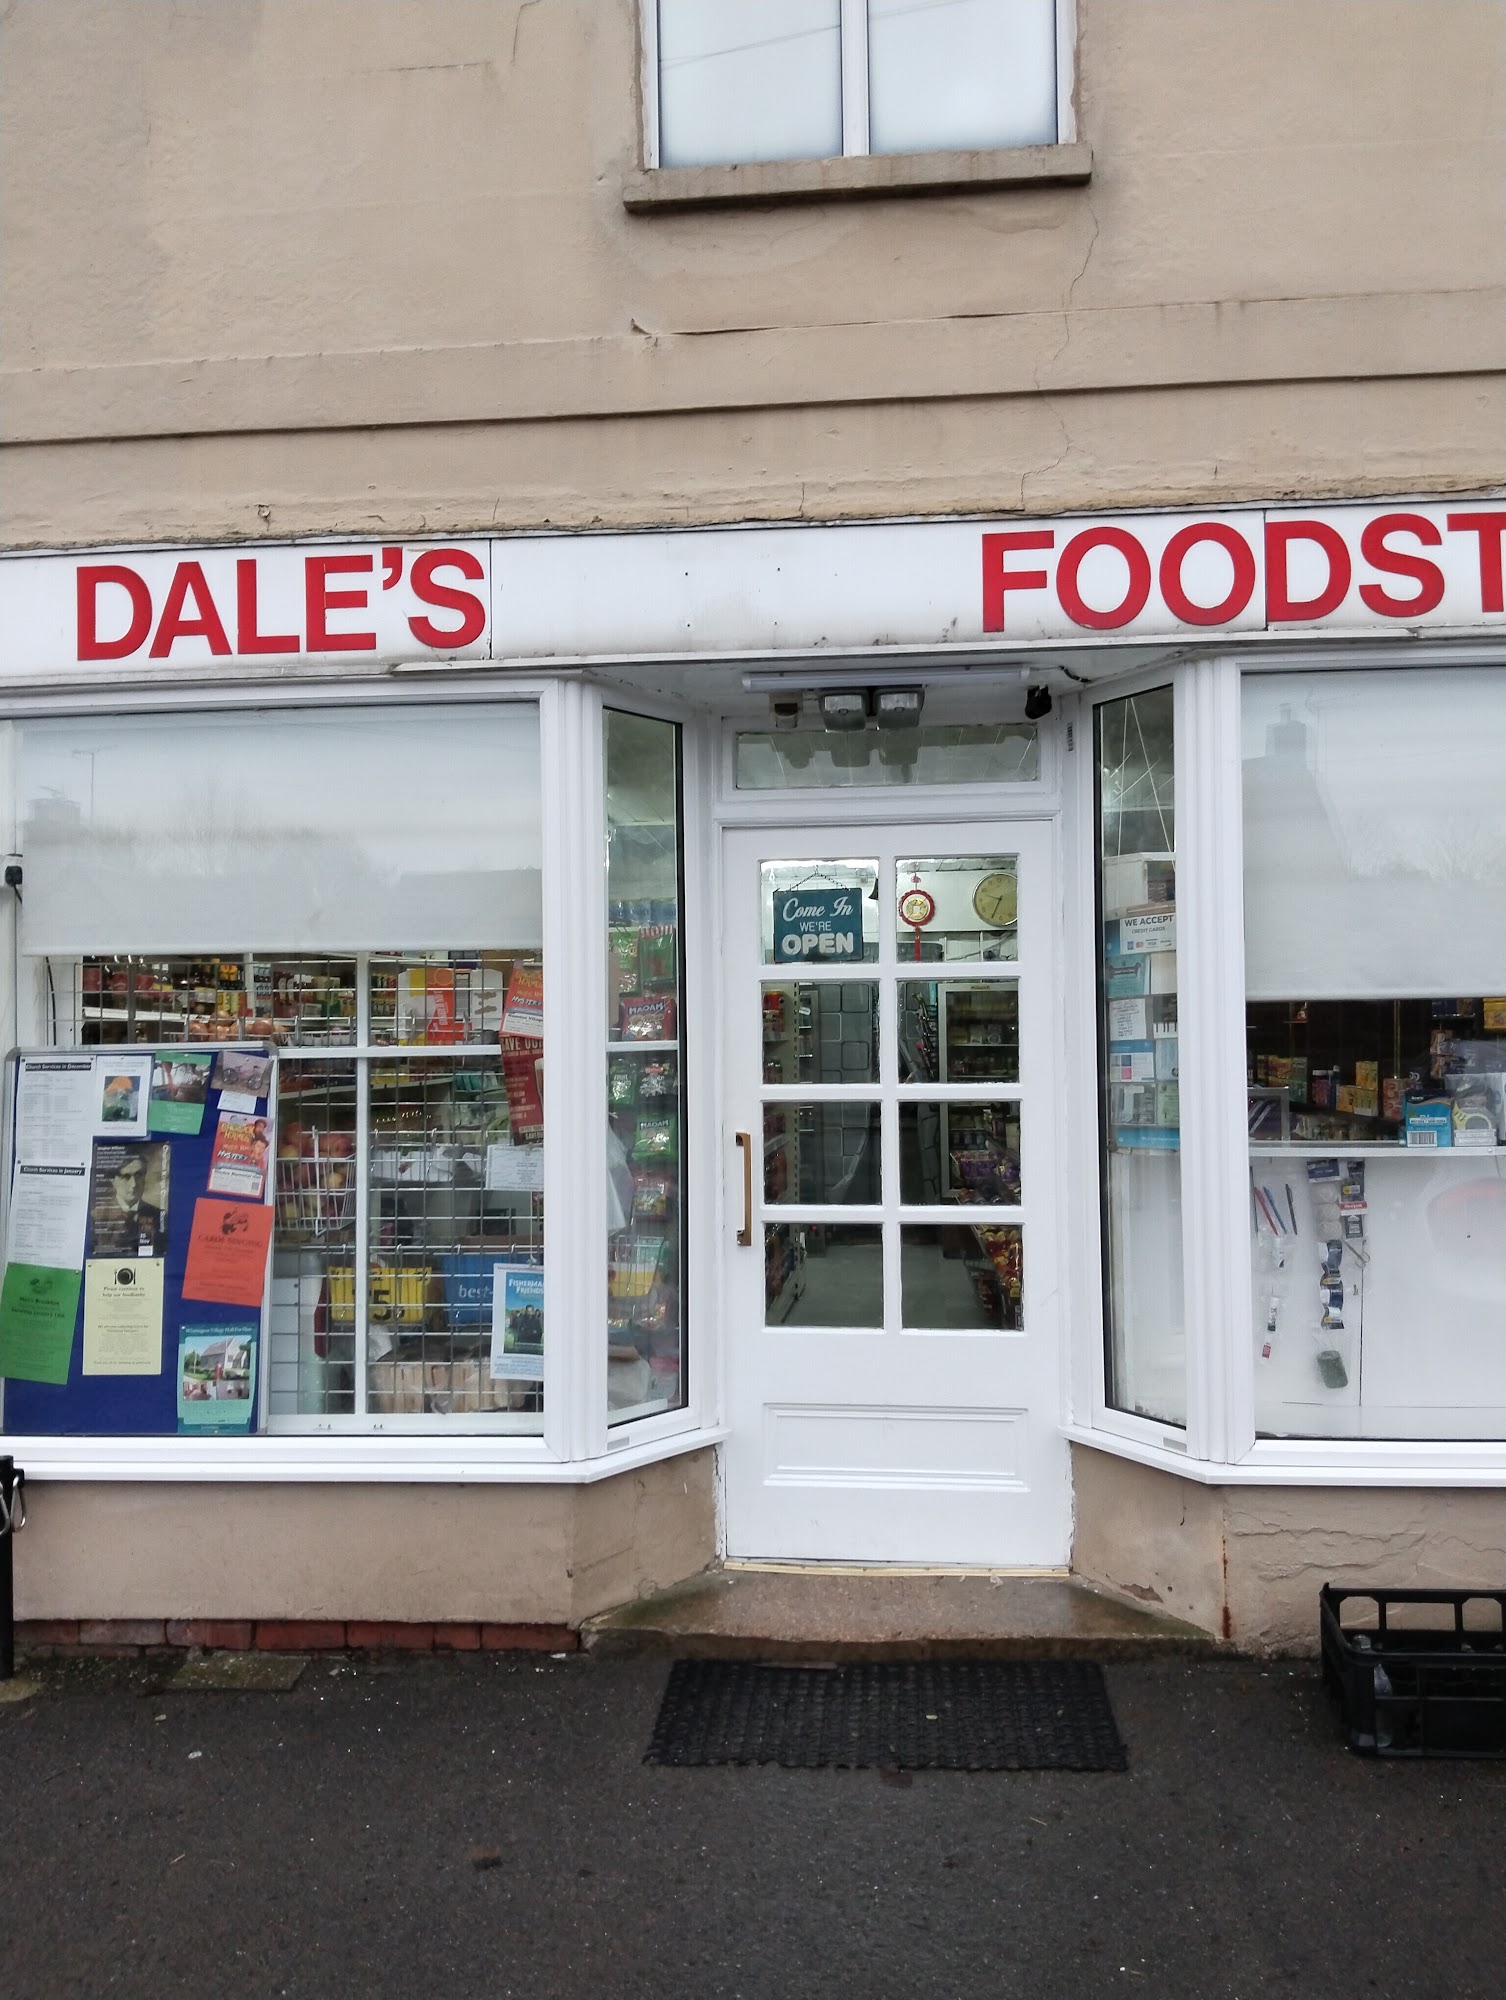 Dale's Stores